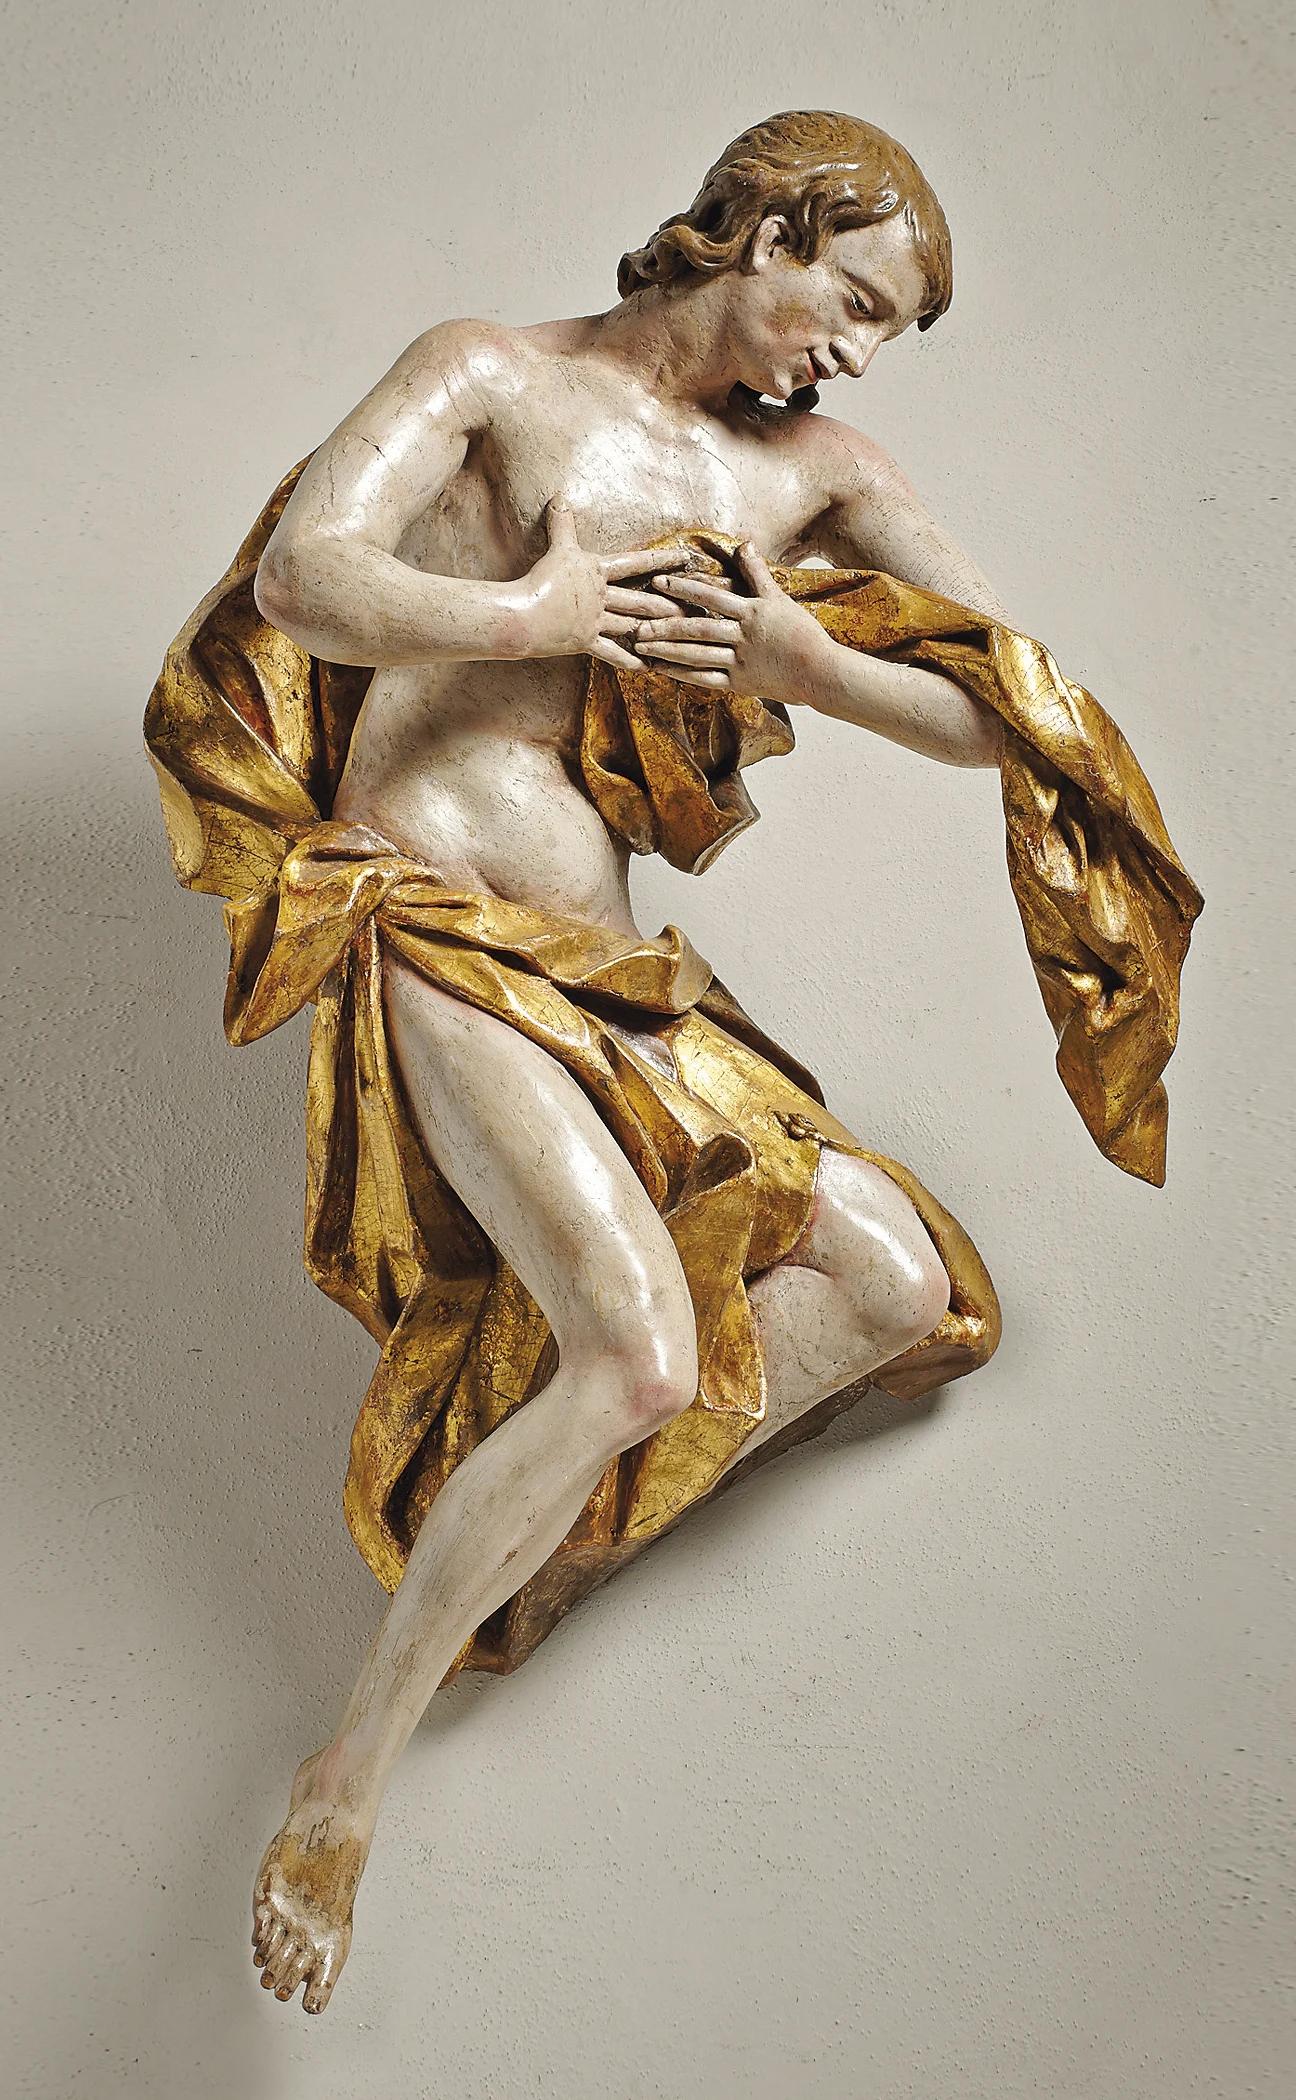 A large polychrome and gilt limewood sculpture of an Angel in the Manner of Franz Ignaz Gunther, ca. 1770, Munich (Bavaria)

Approximate size: 107 cm (h)

The present sculpture probably once formed part of the upper section of a tall church altar in